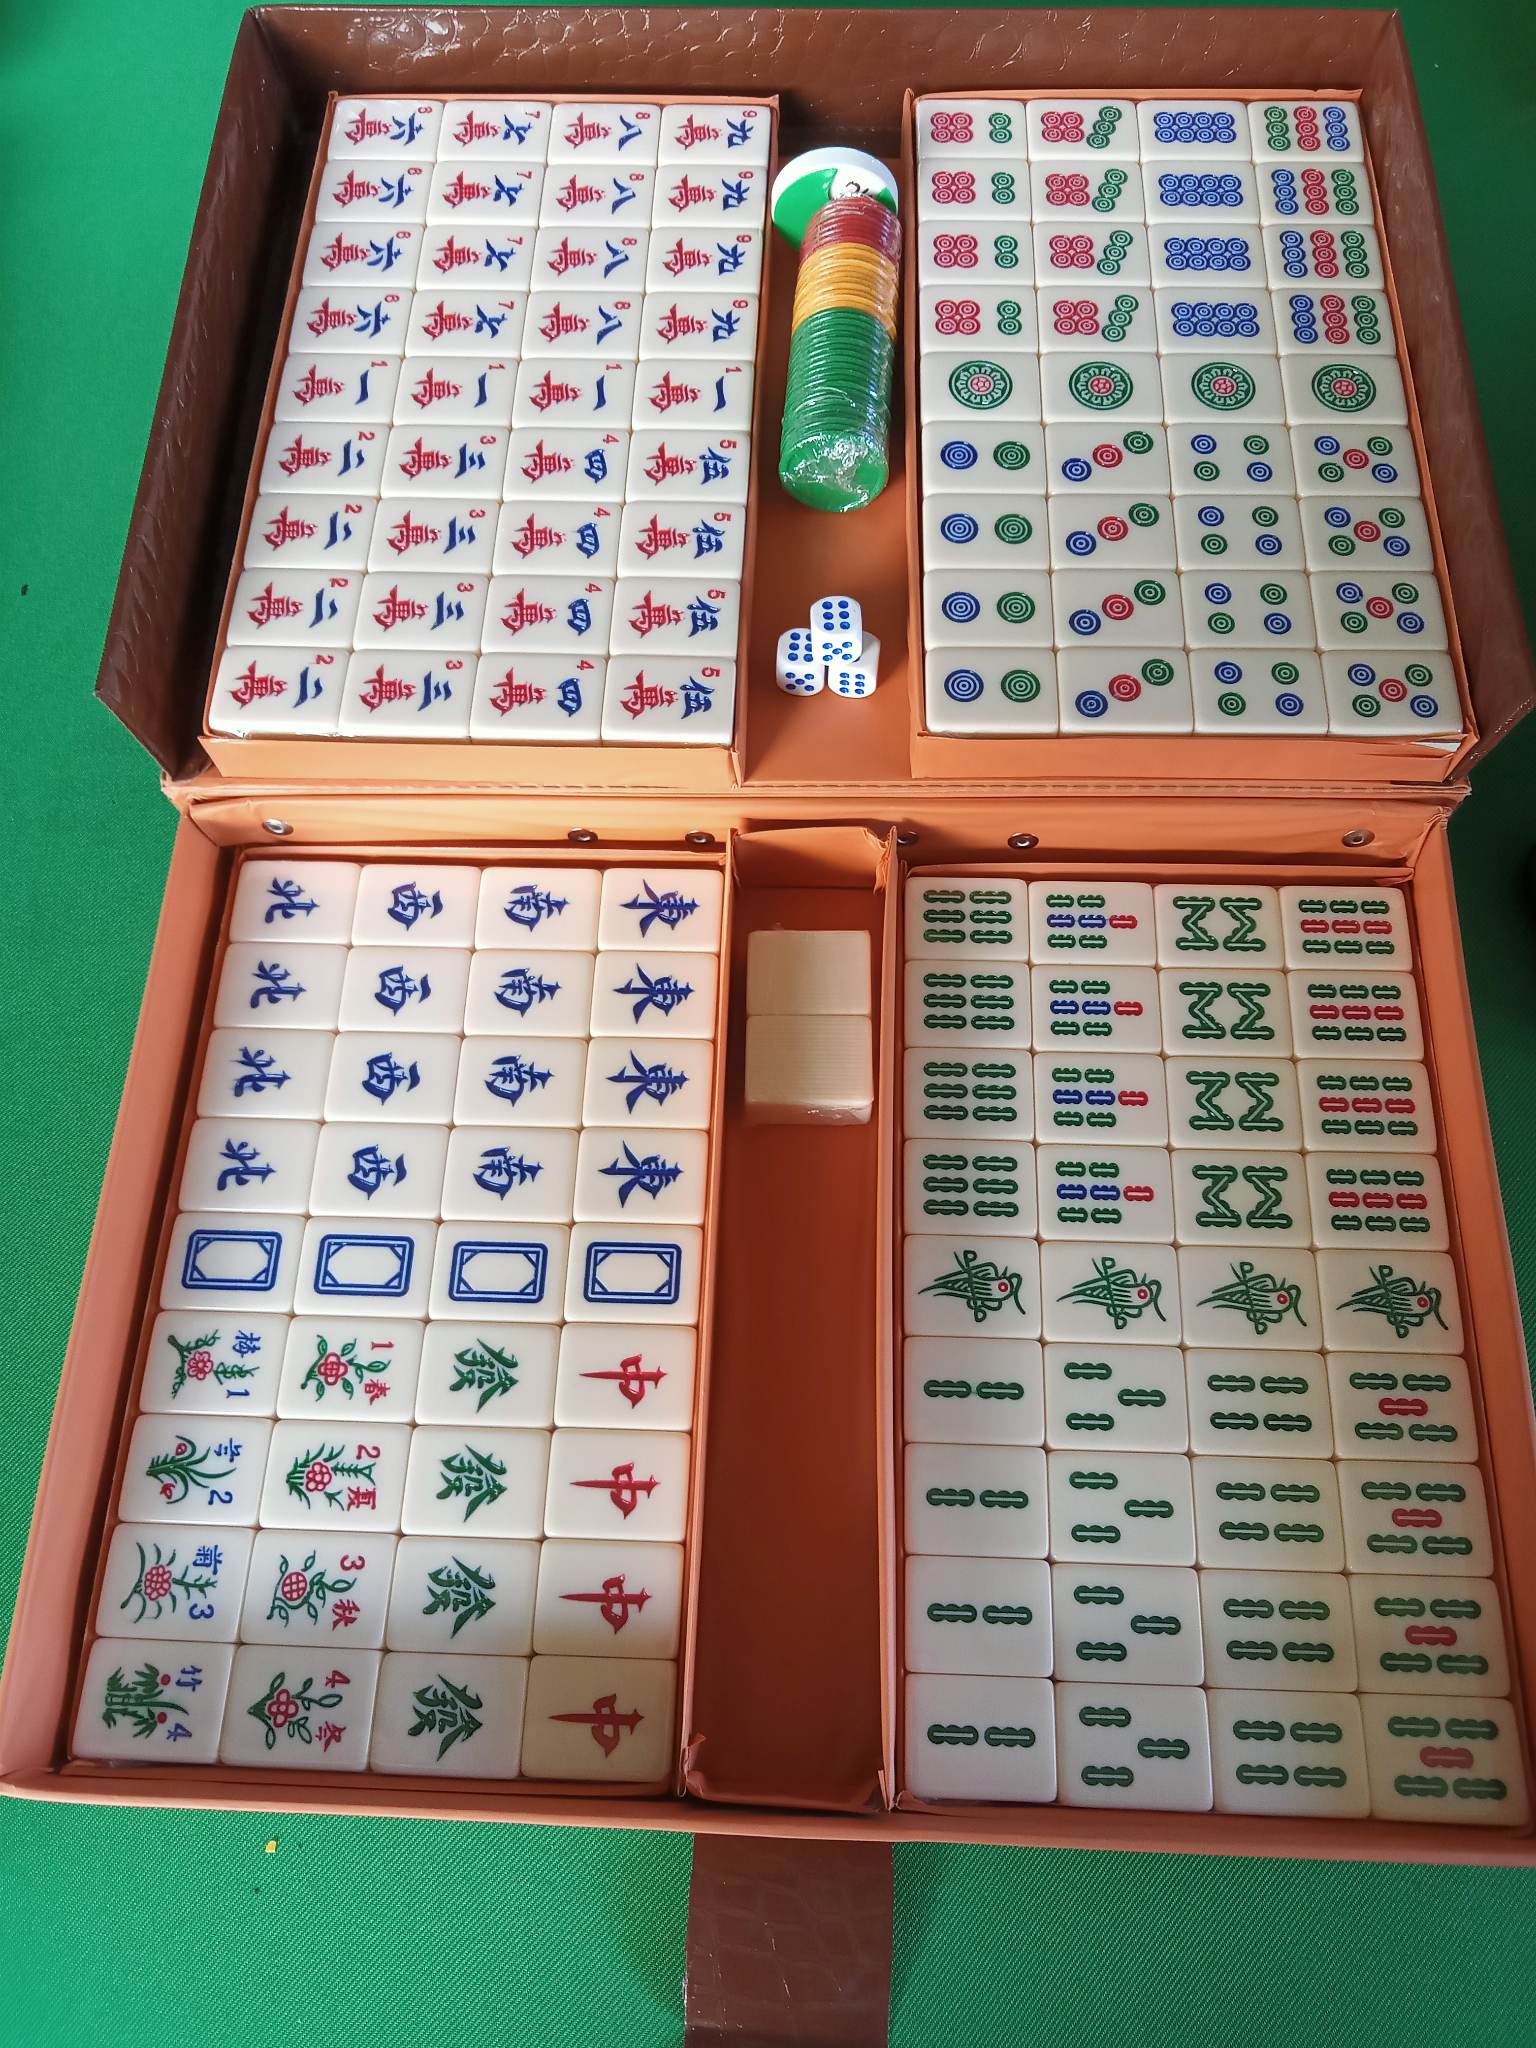 Antique Rare Chinese Mahjong Set (no English no Arabic Numerals) Small 2” x  2.5” Tiles Special Tiles, Sage, Cat, Mouse & Flowers